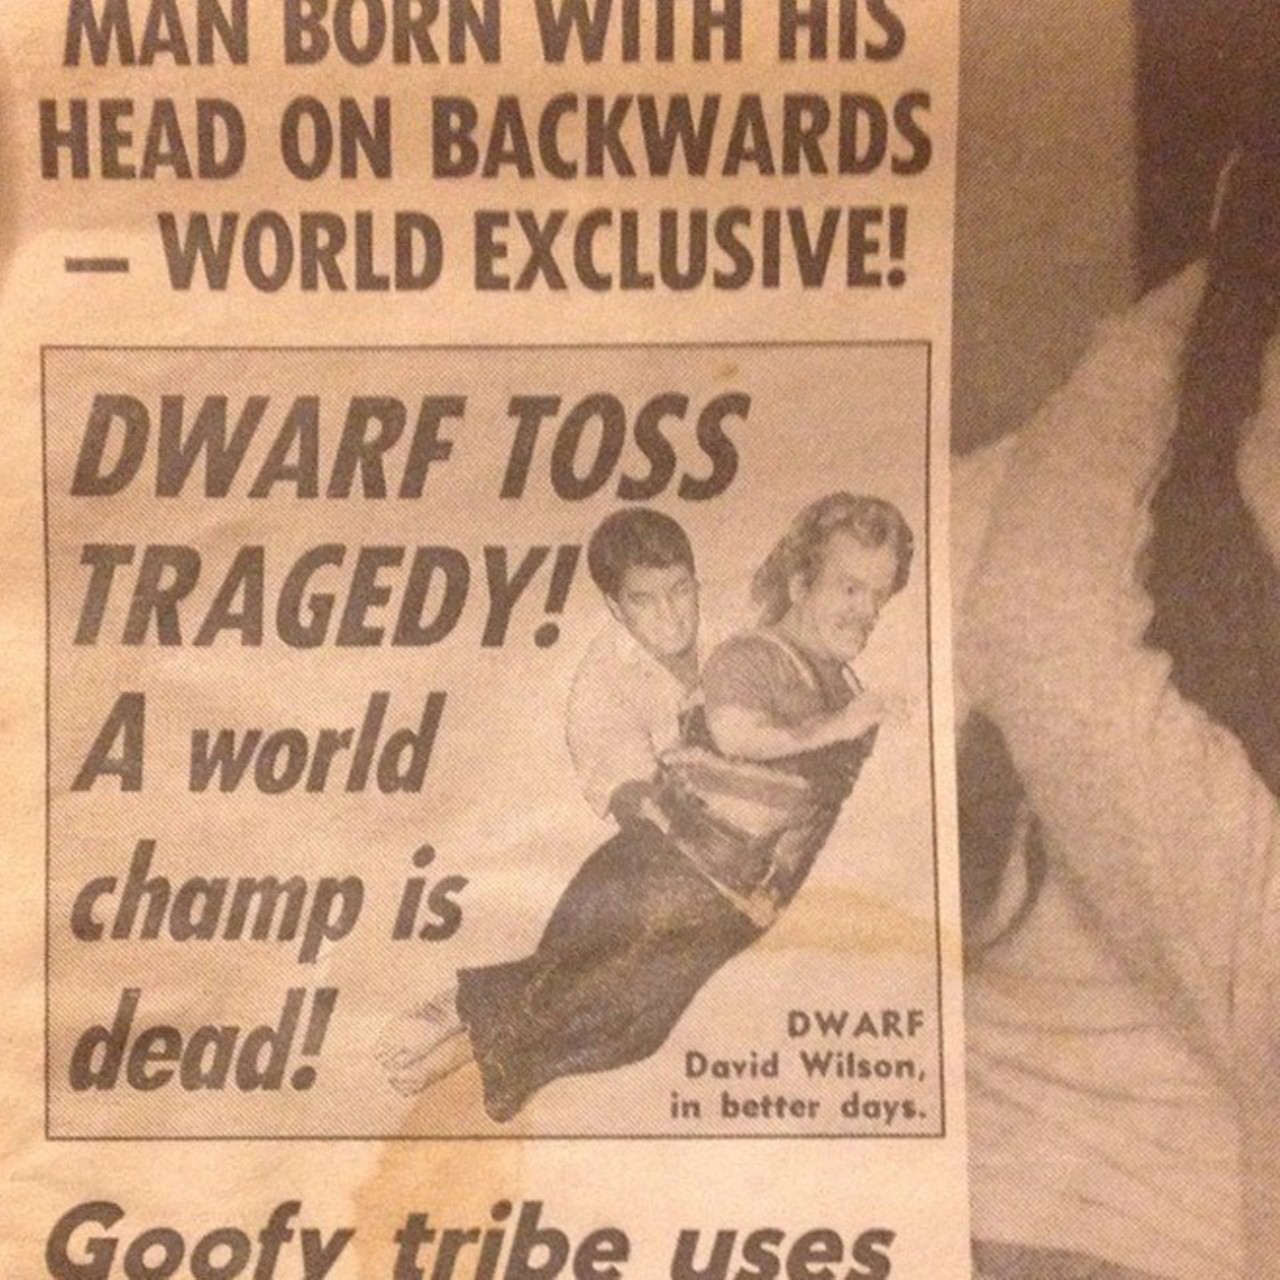 You could die after a vigorous round of dwarf tossing, which was banned in Florida in 1989.
Photo via Instagram user surruh_ferg